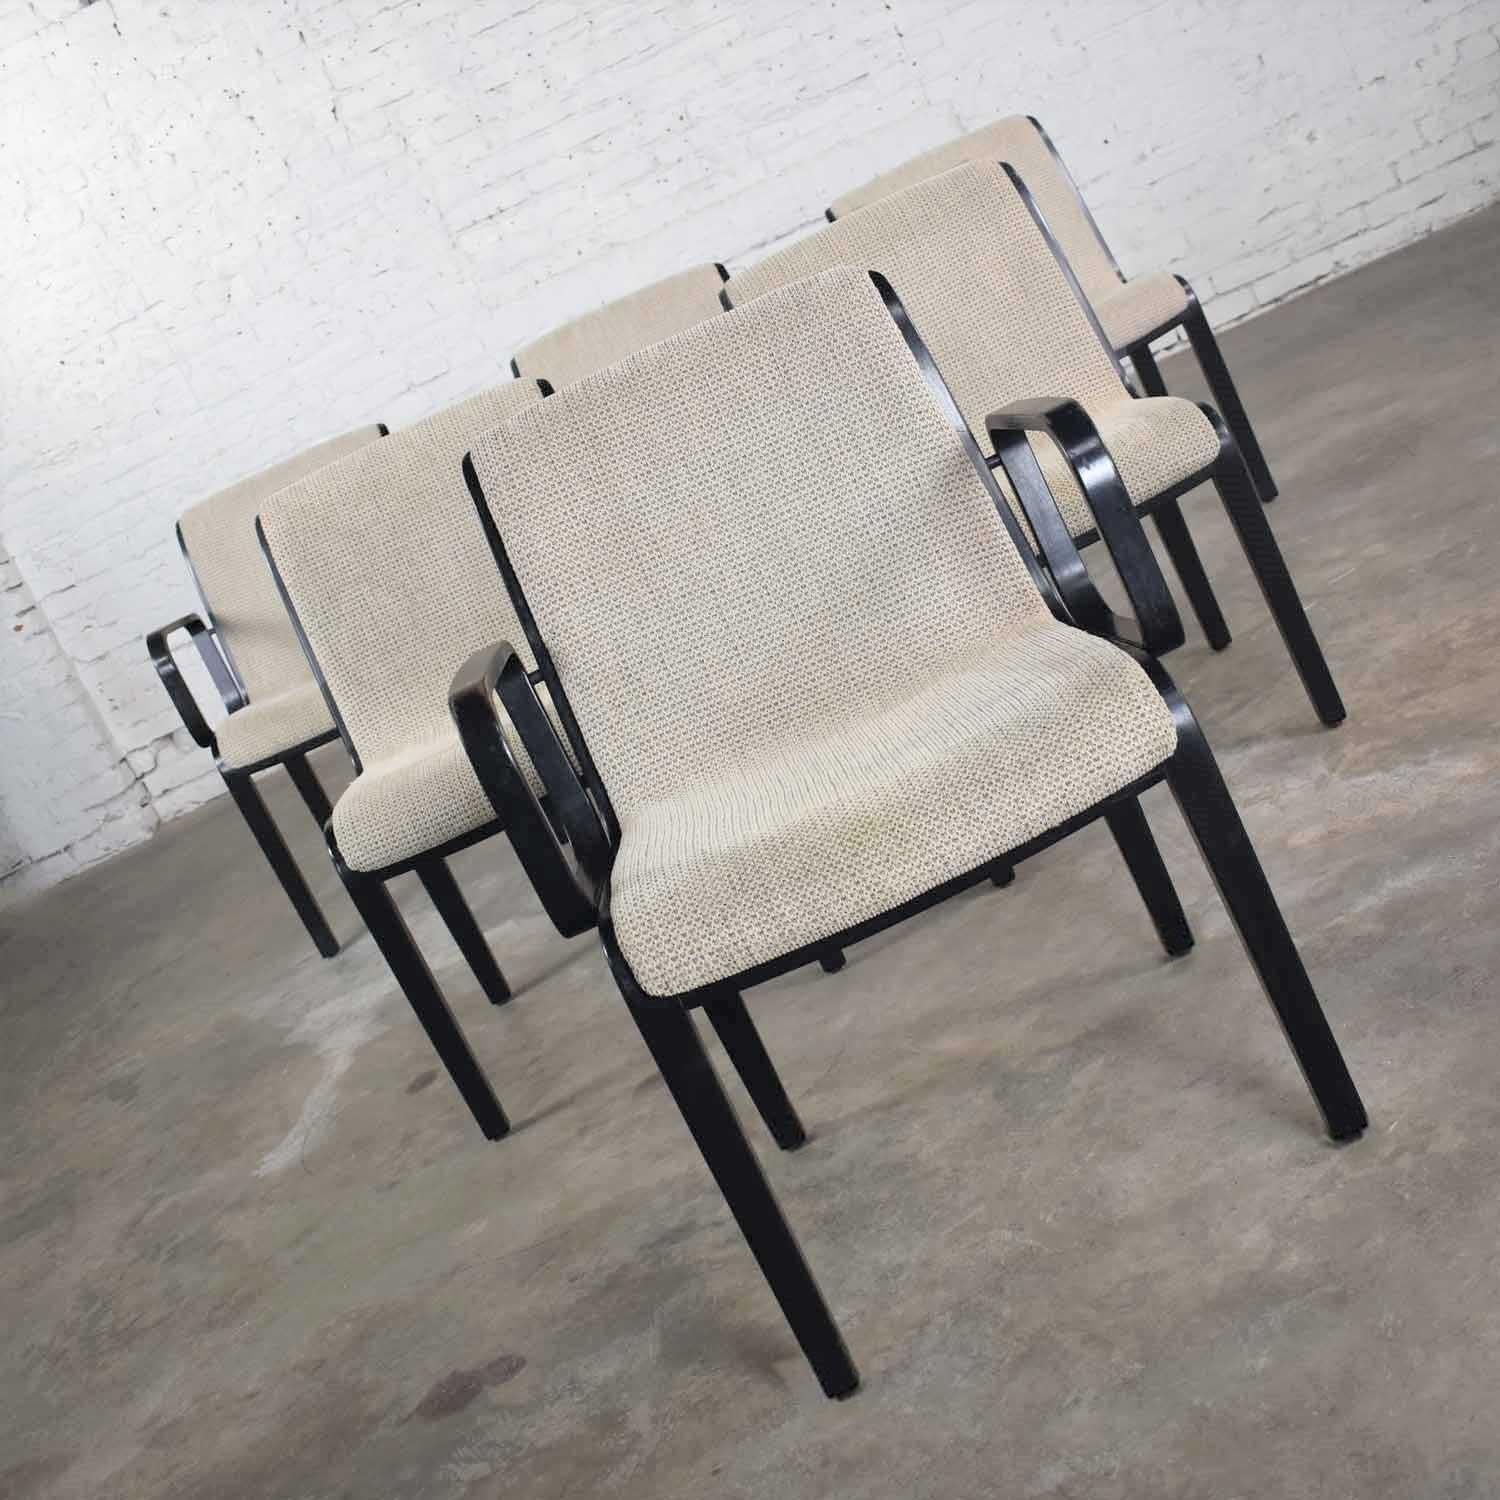 Handsome set of 6 Mid-Century Modern 1300 Series dining chairs designed by Bill Stephens in 1967 for Knoll International. This set includes 2 armchairs and 4 side chairs and has a black bentwood frame and white with black tweed original upholstery.